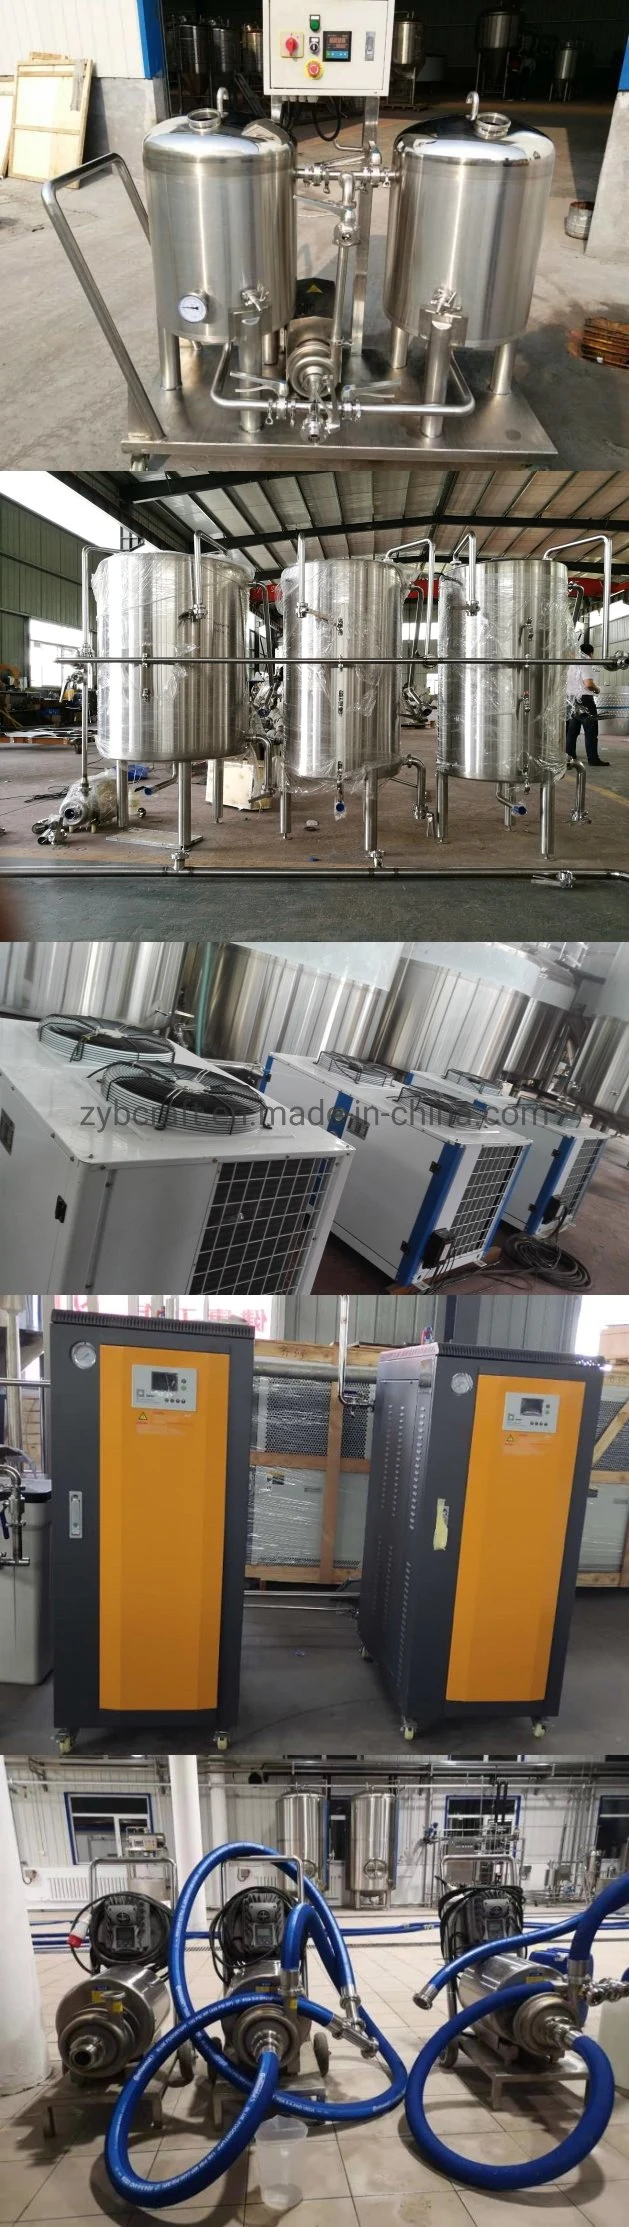 1500L 15hl Commercial Brewery for Sale Turnkey Brewing System Micro Beer Brewery Equipment